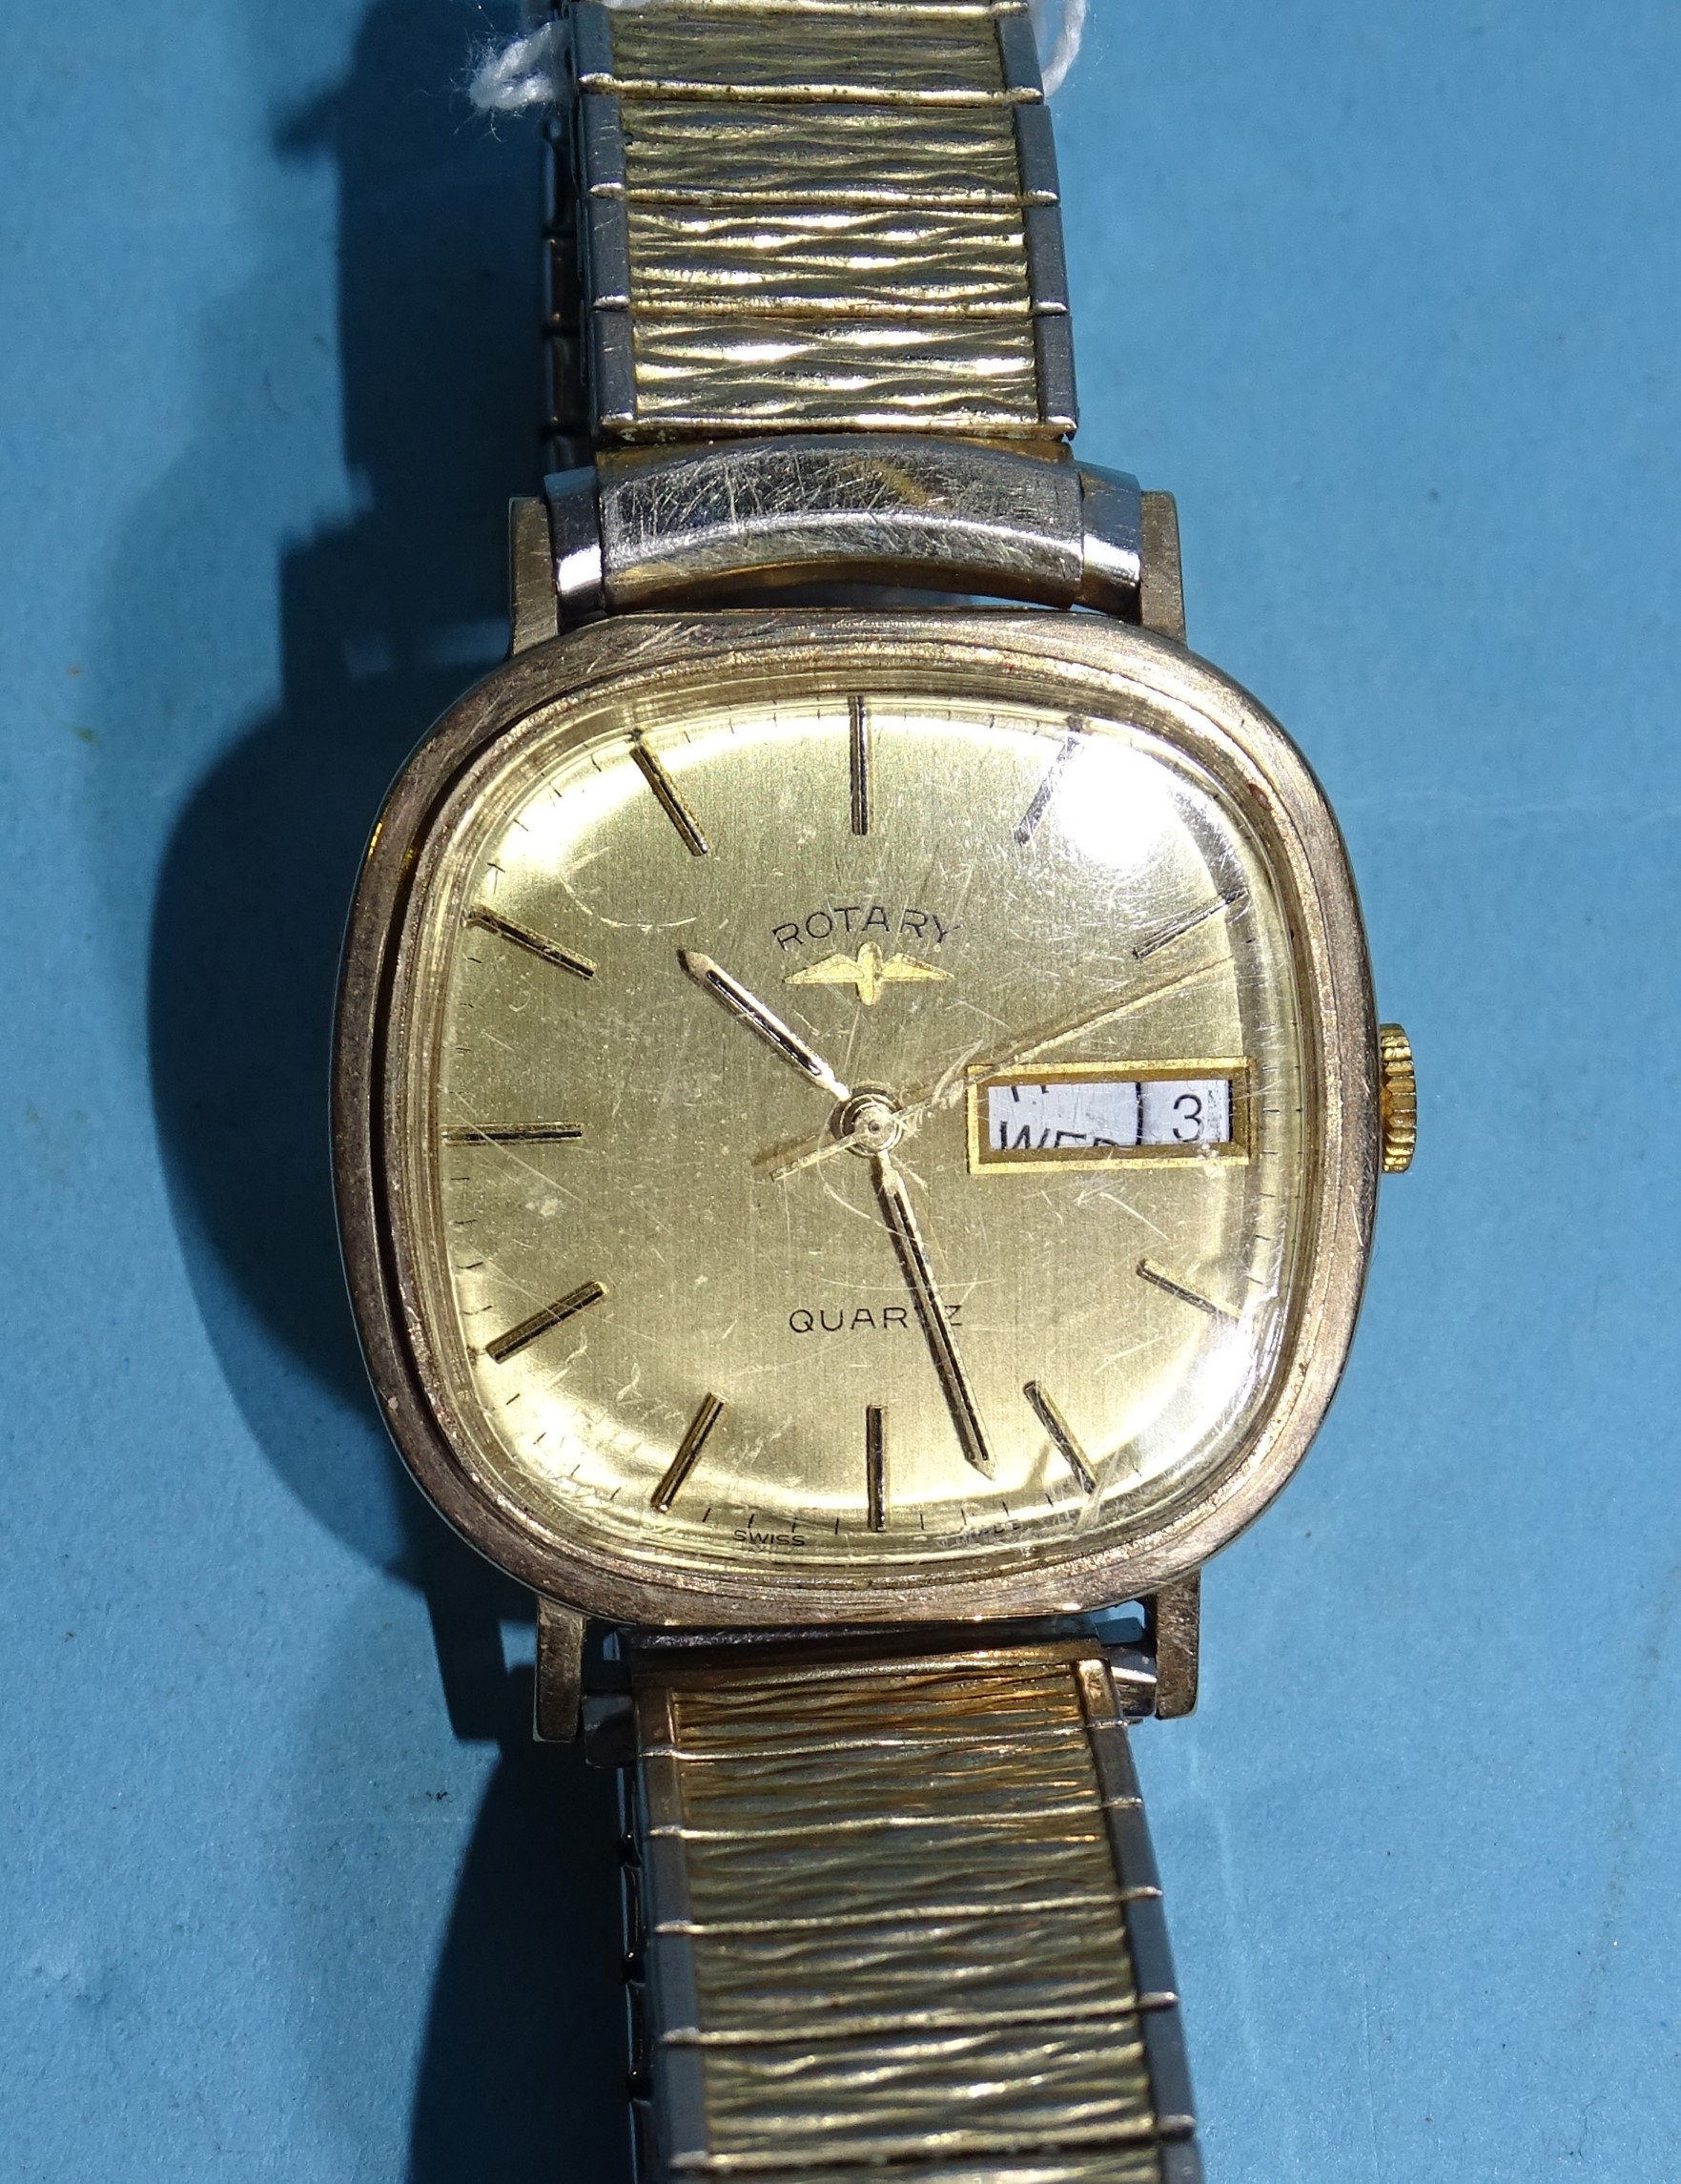 Rotary, a 9ct-gold-cased quartz gent's wrist watch, 1980, with gilt dial day/date aperture, baton